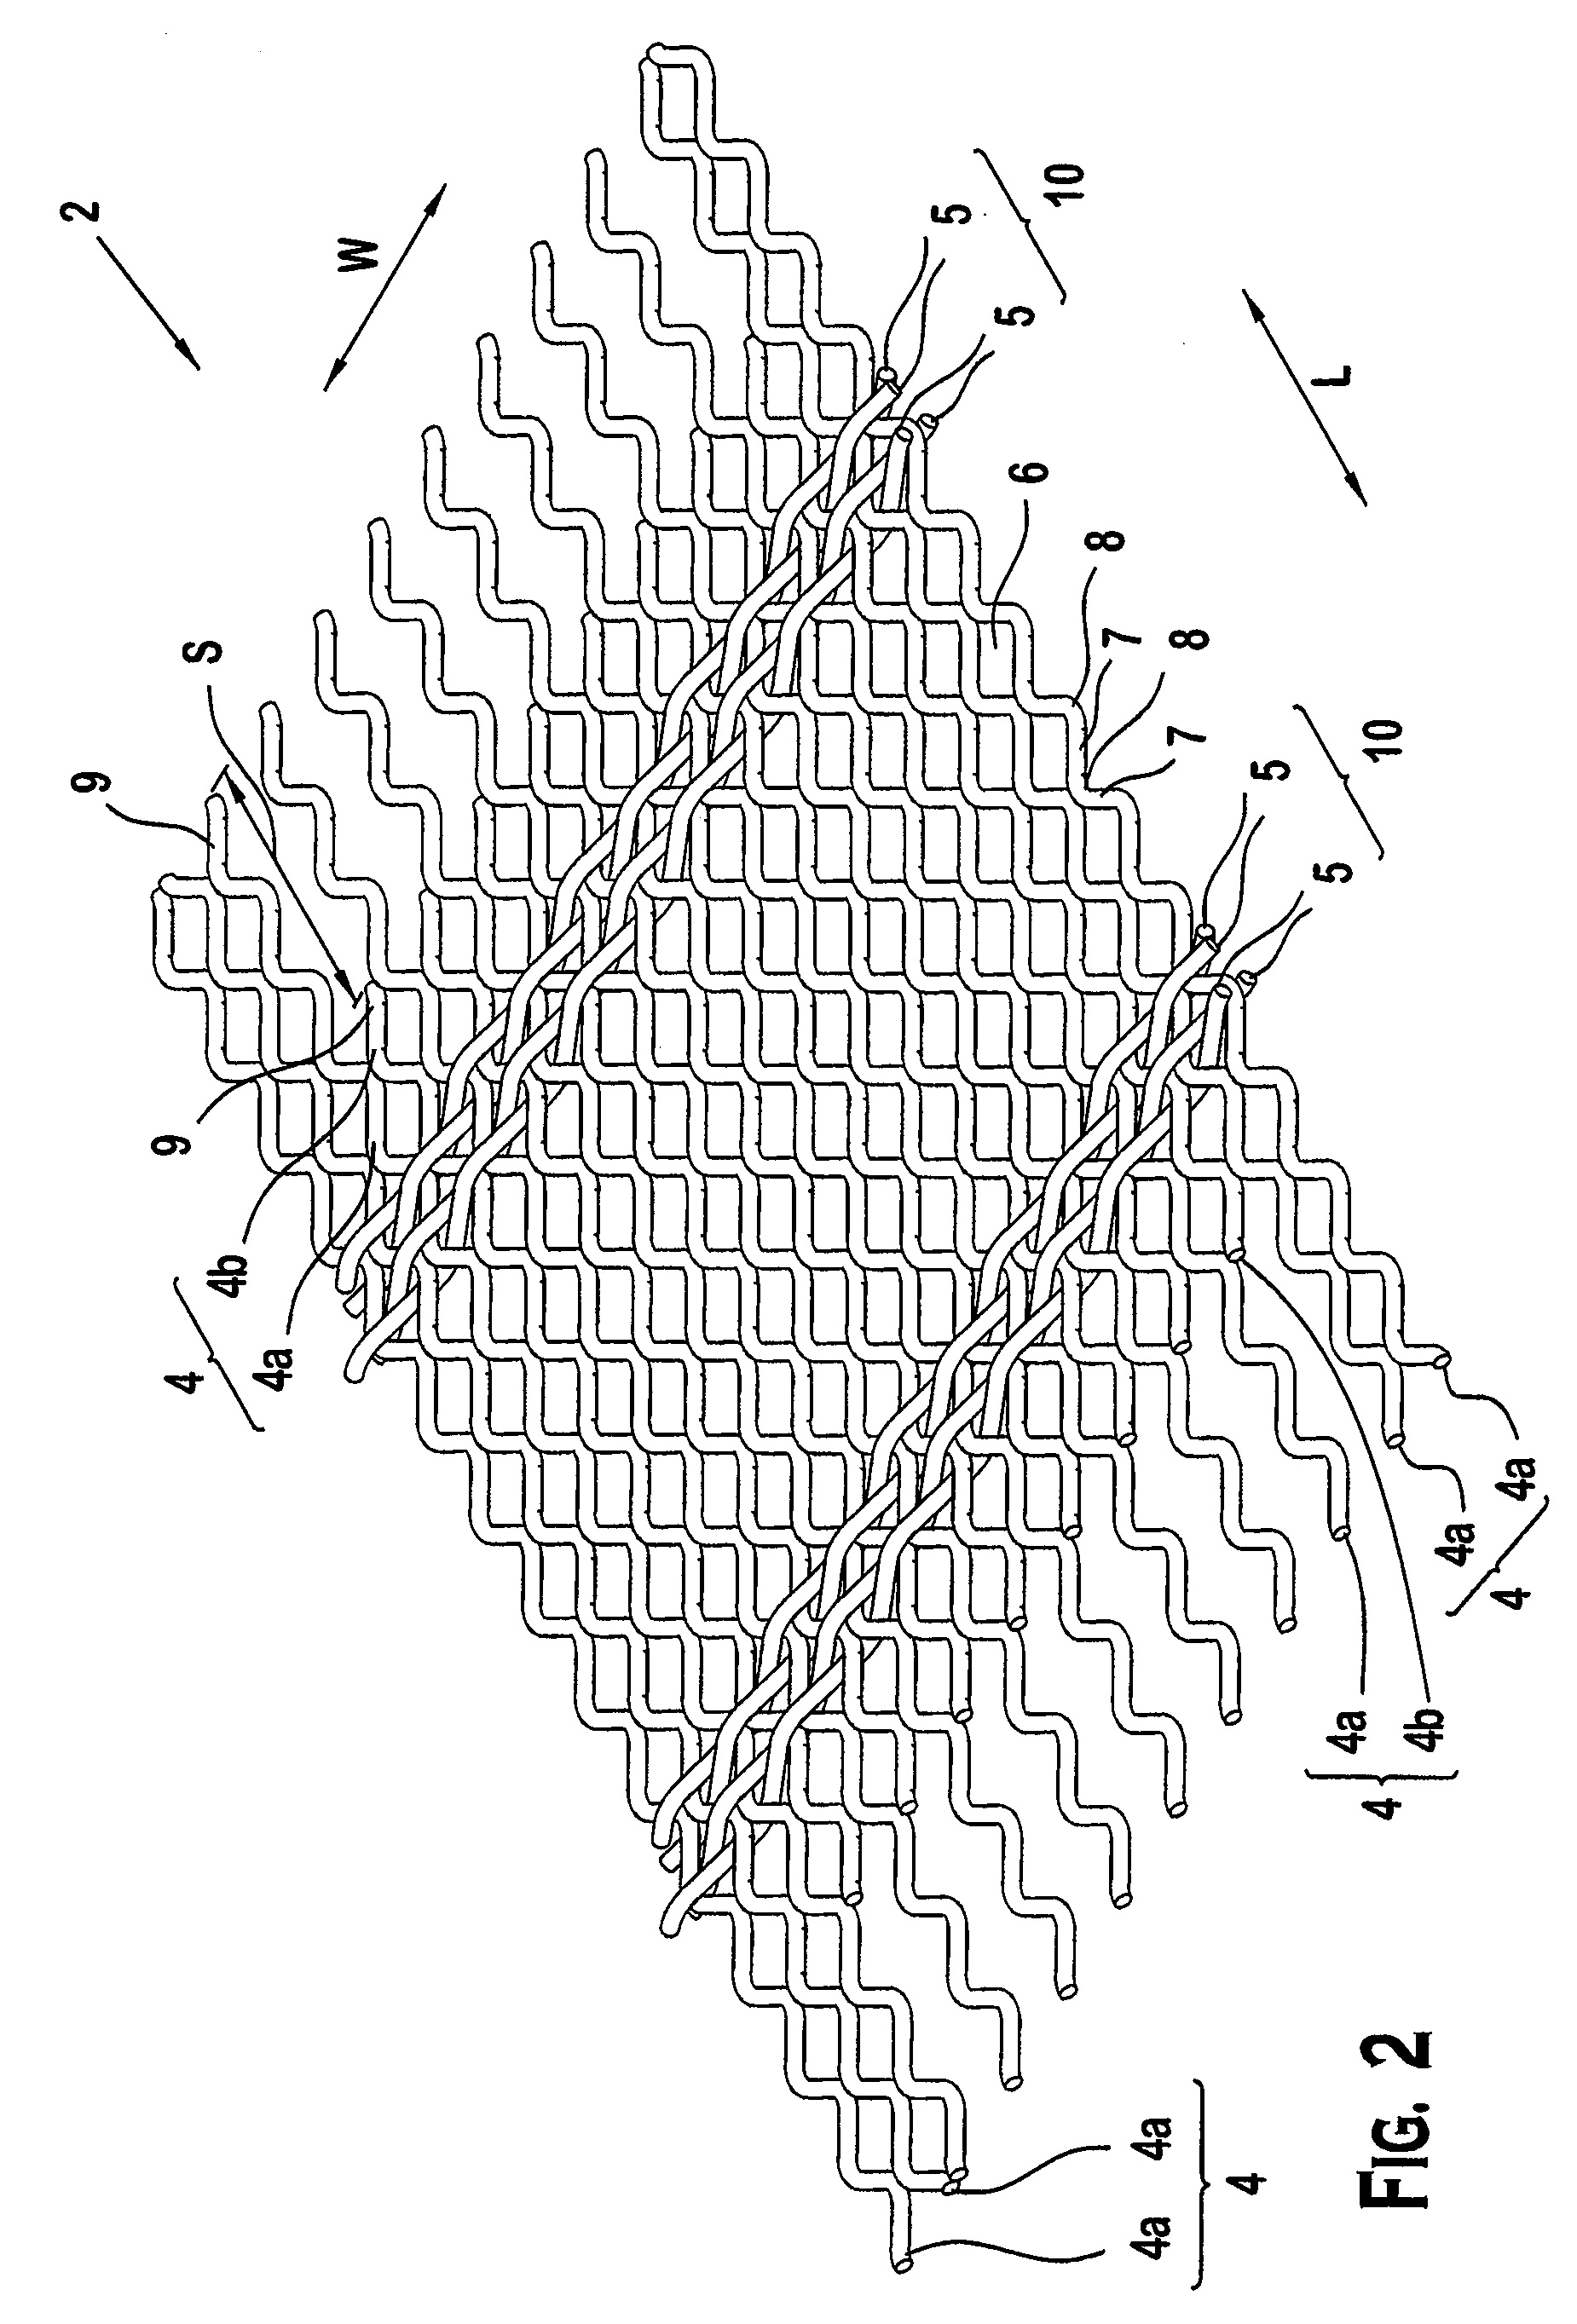 Screen for a Vibratory Separator Having Tension Reduction Feature